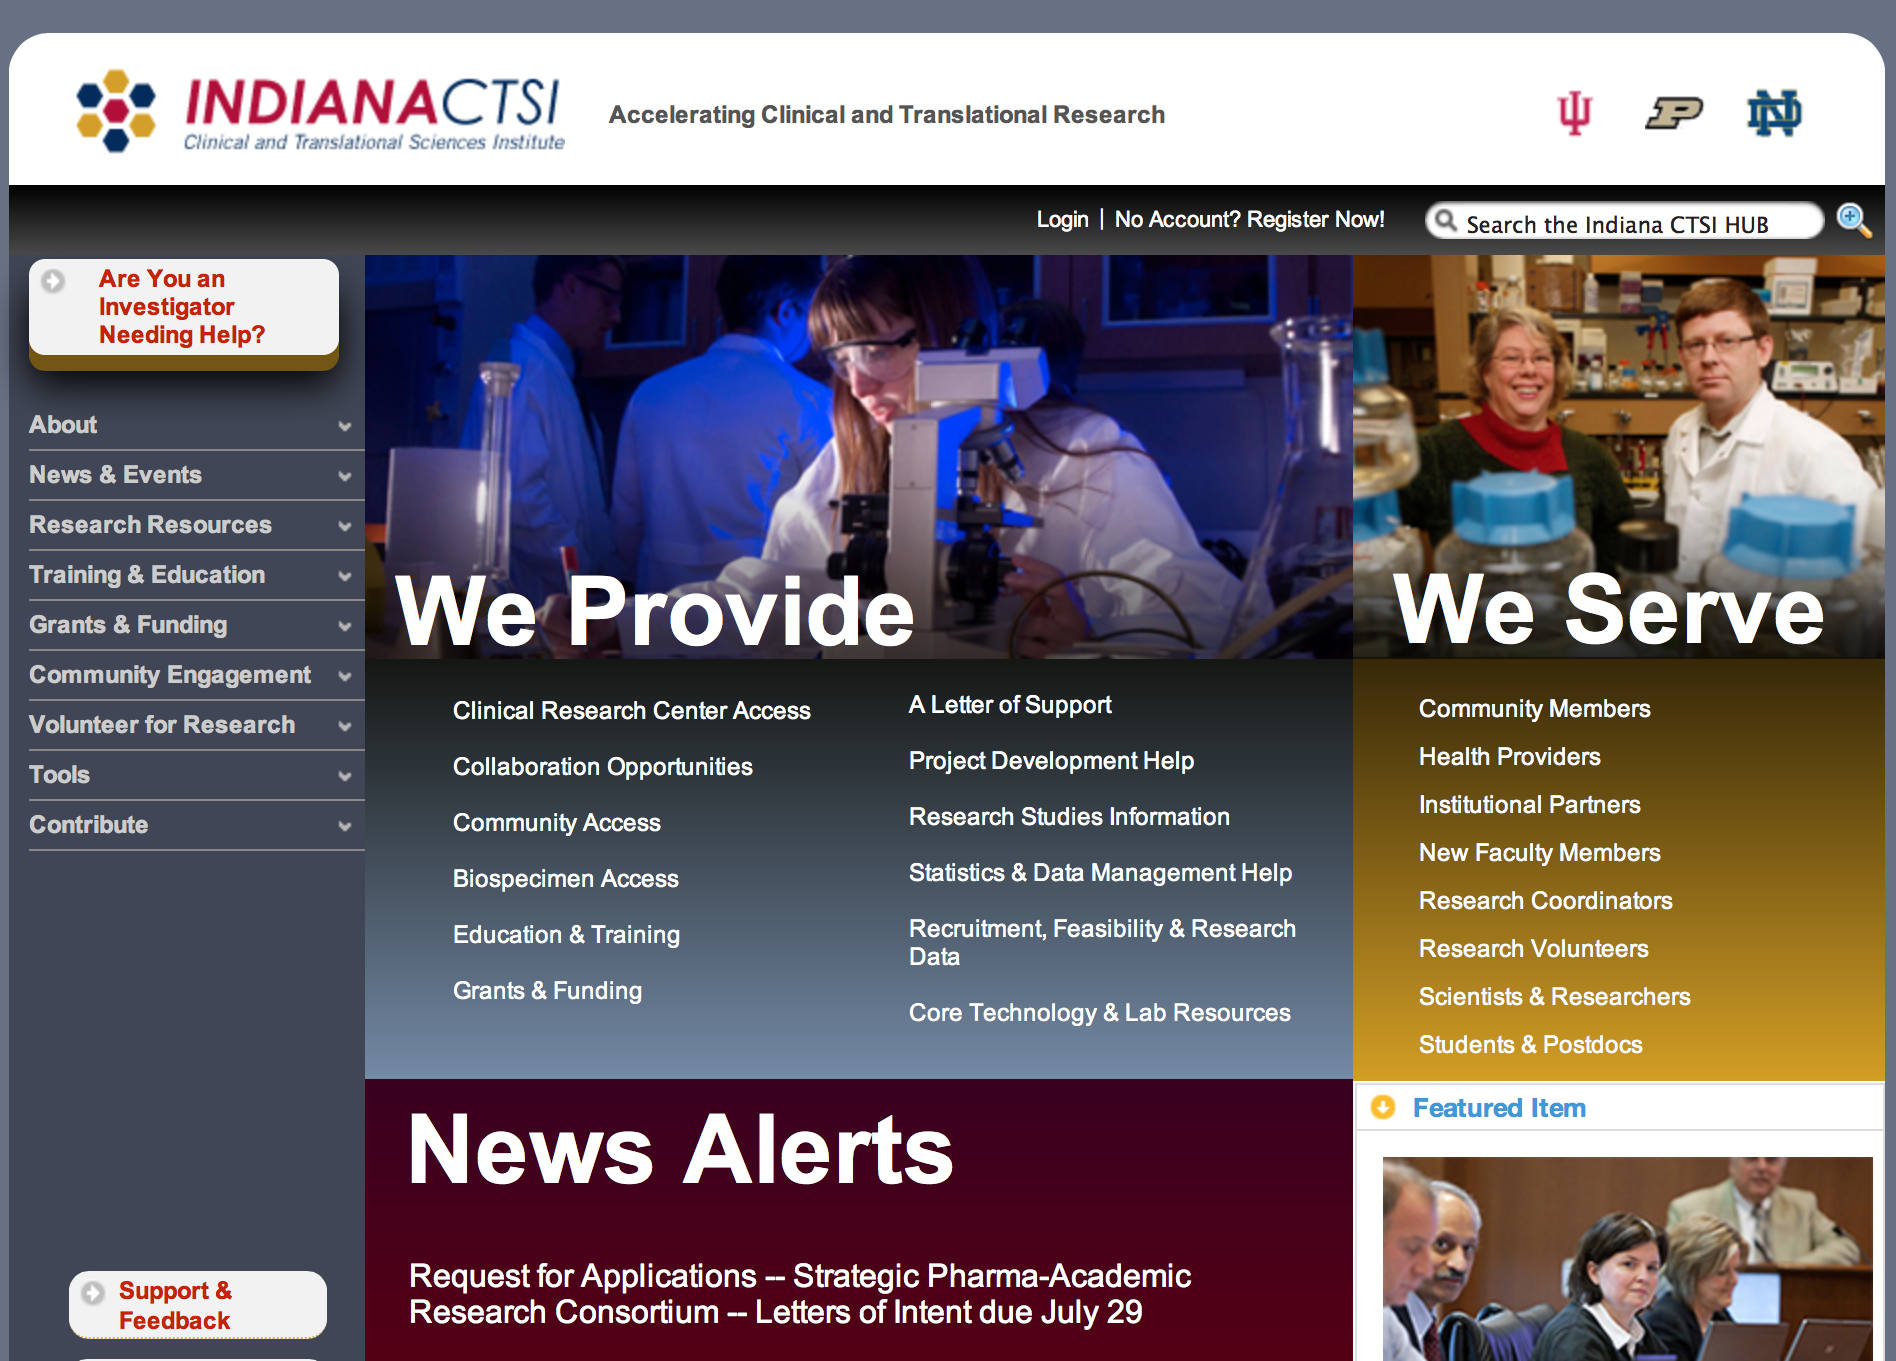 partial screenshot of the Indiana CTSI home page